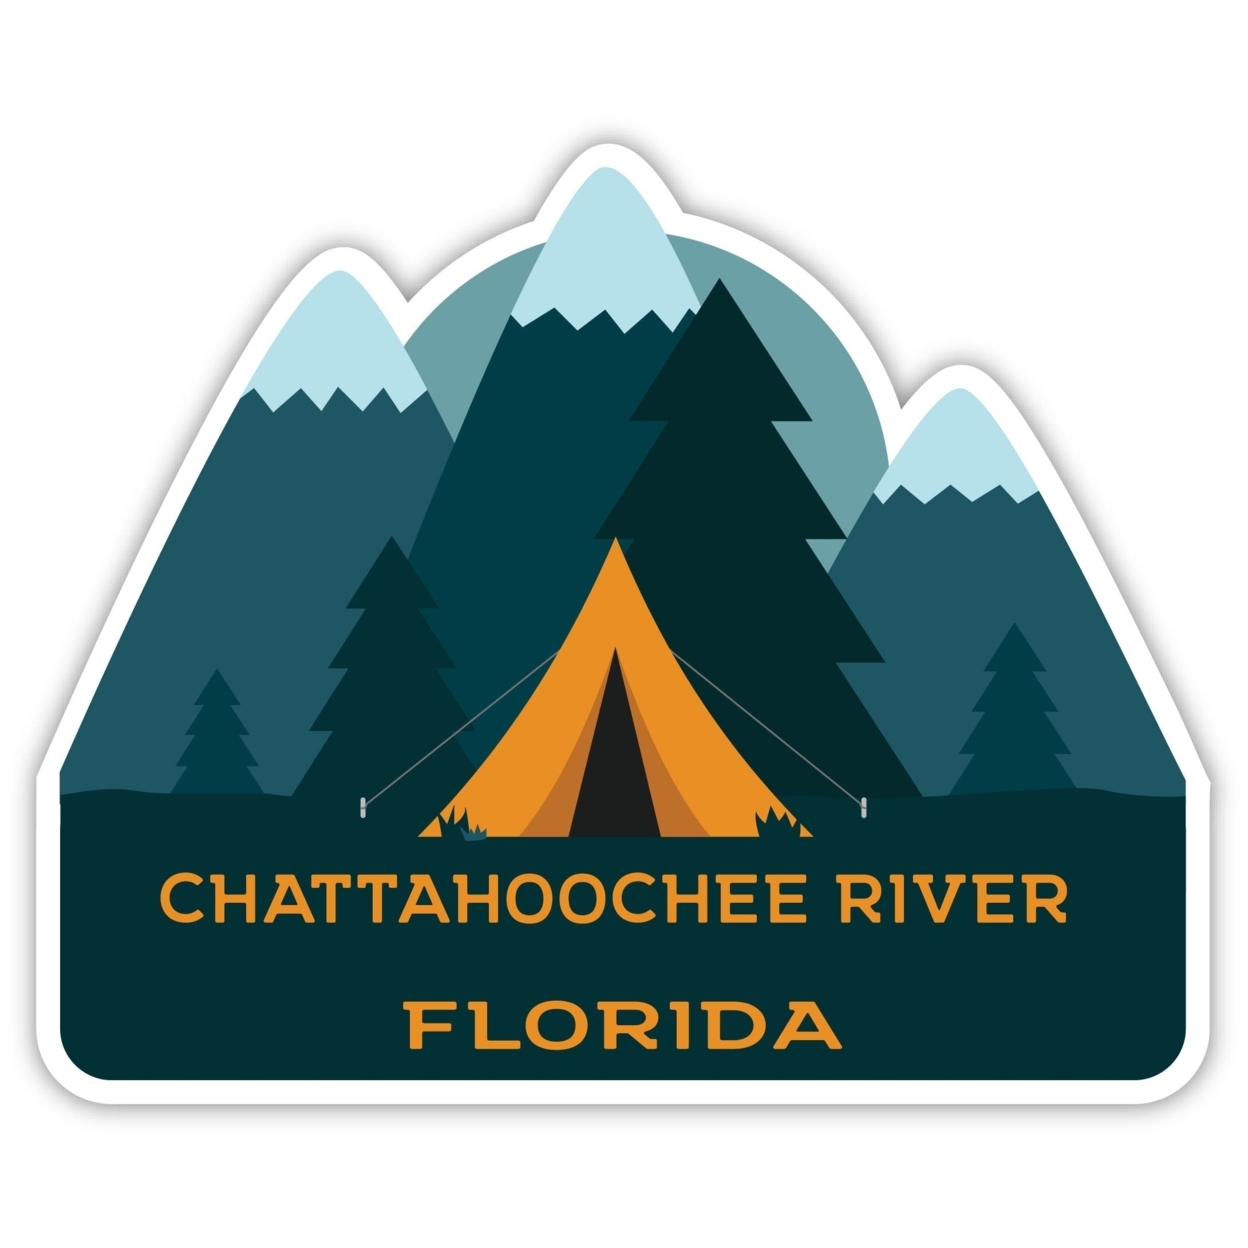 Chattahoochee River Florida Souvenir Decorative Stickers (Choose Theme And Size) - 4-Pack, 10-Inch, Tent